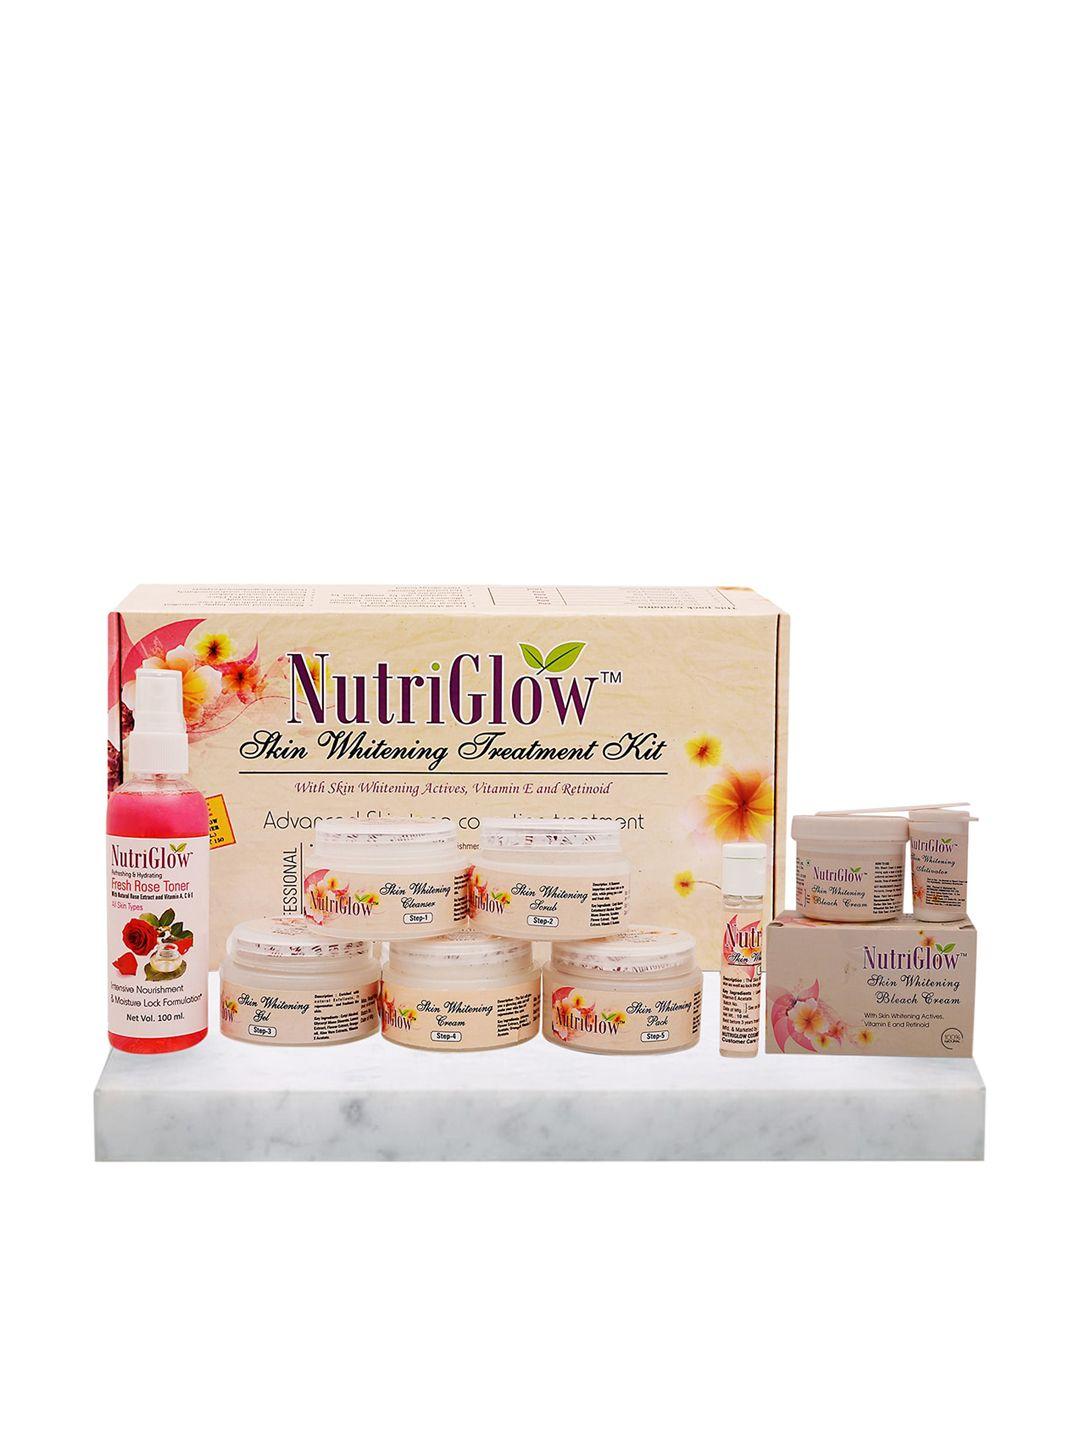 nutriglow skin whitening treatment facial kit with face toner & bleach cream